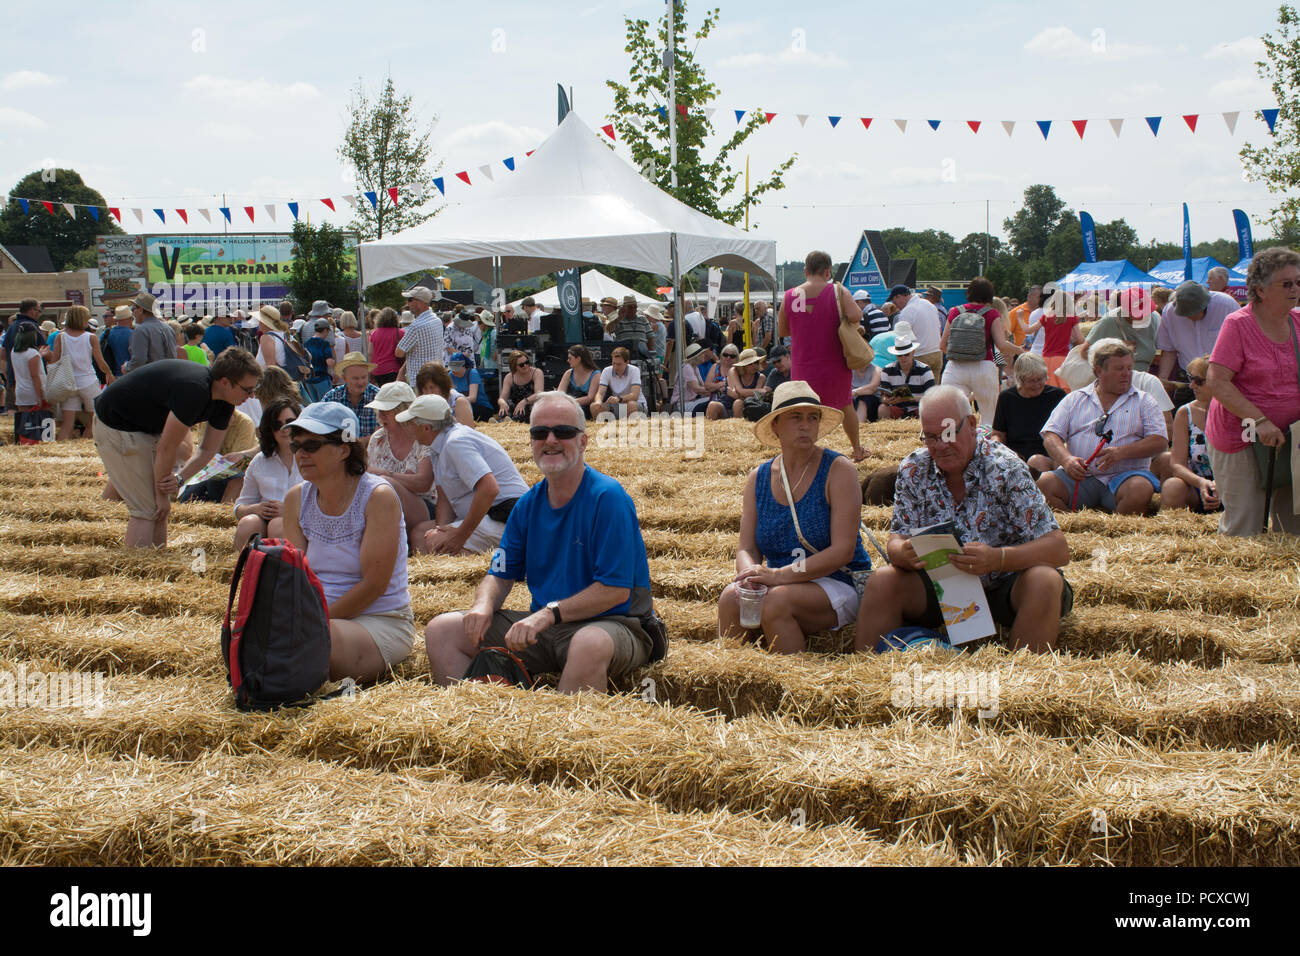 Blenheim Palace, Oxfordshire, UK. 4th August, 2018. Thousands of people went to the Countryfile Live show in the beautiful grounds of Blenheim Palace on a hot, sunny day. Stock Photo